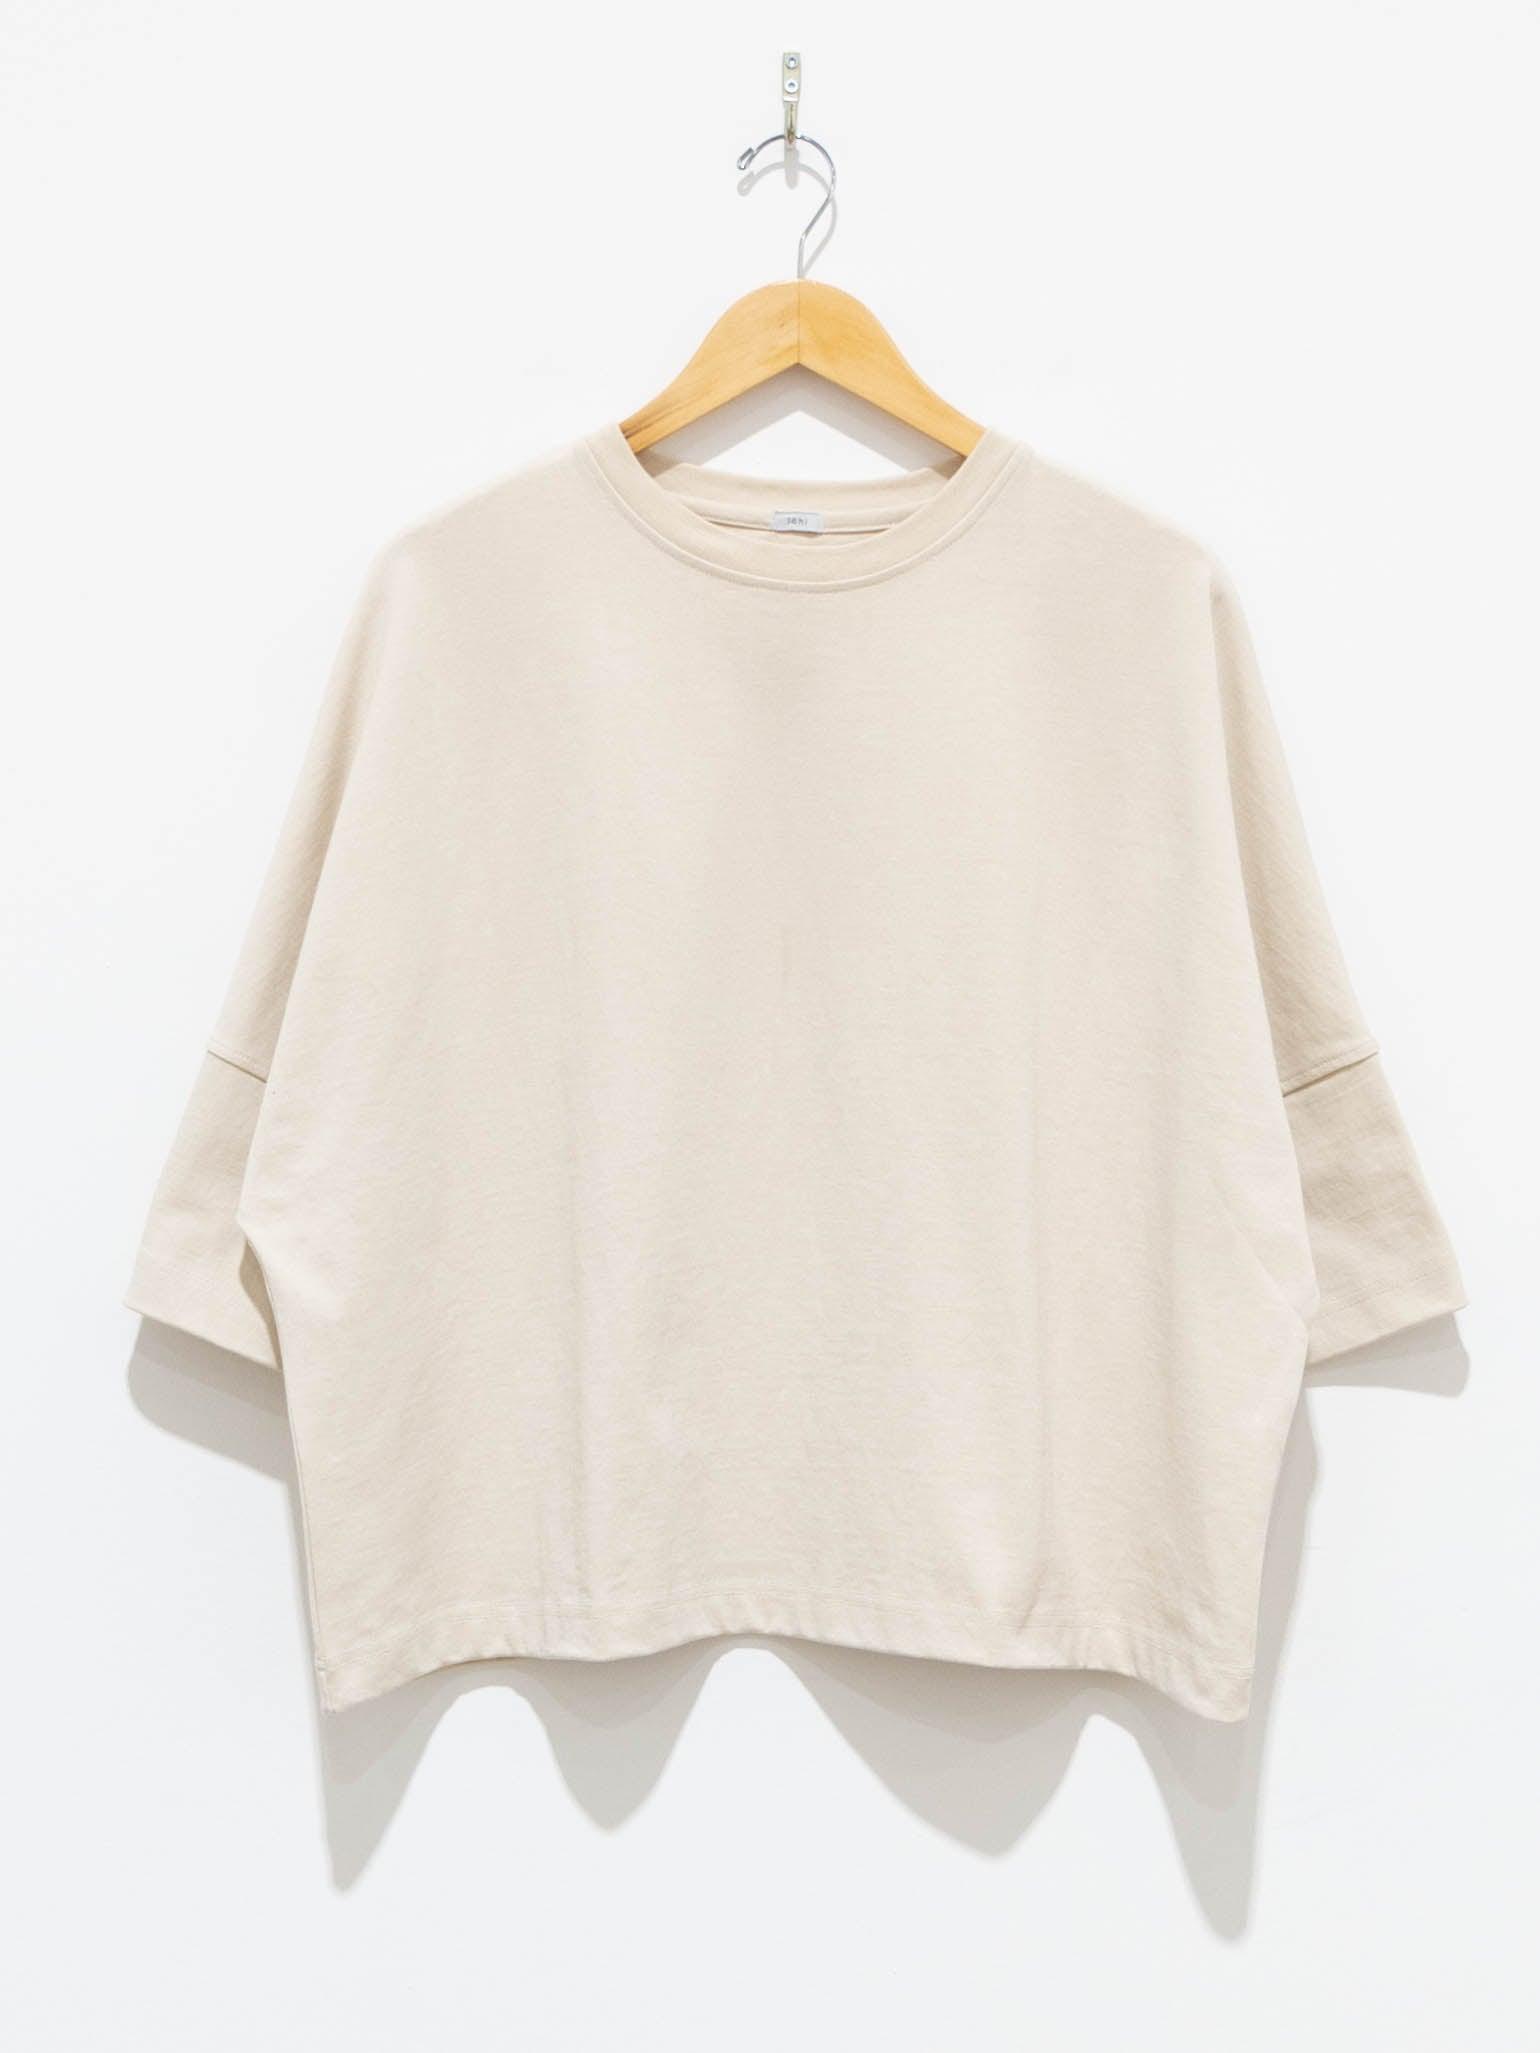 Namu Shop - Ichi Antiquites Relaxed Pullover Top - Ivory